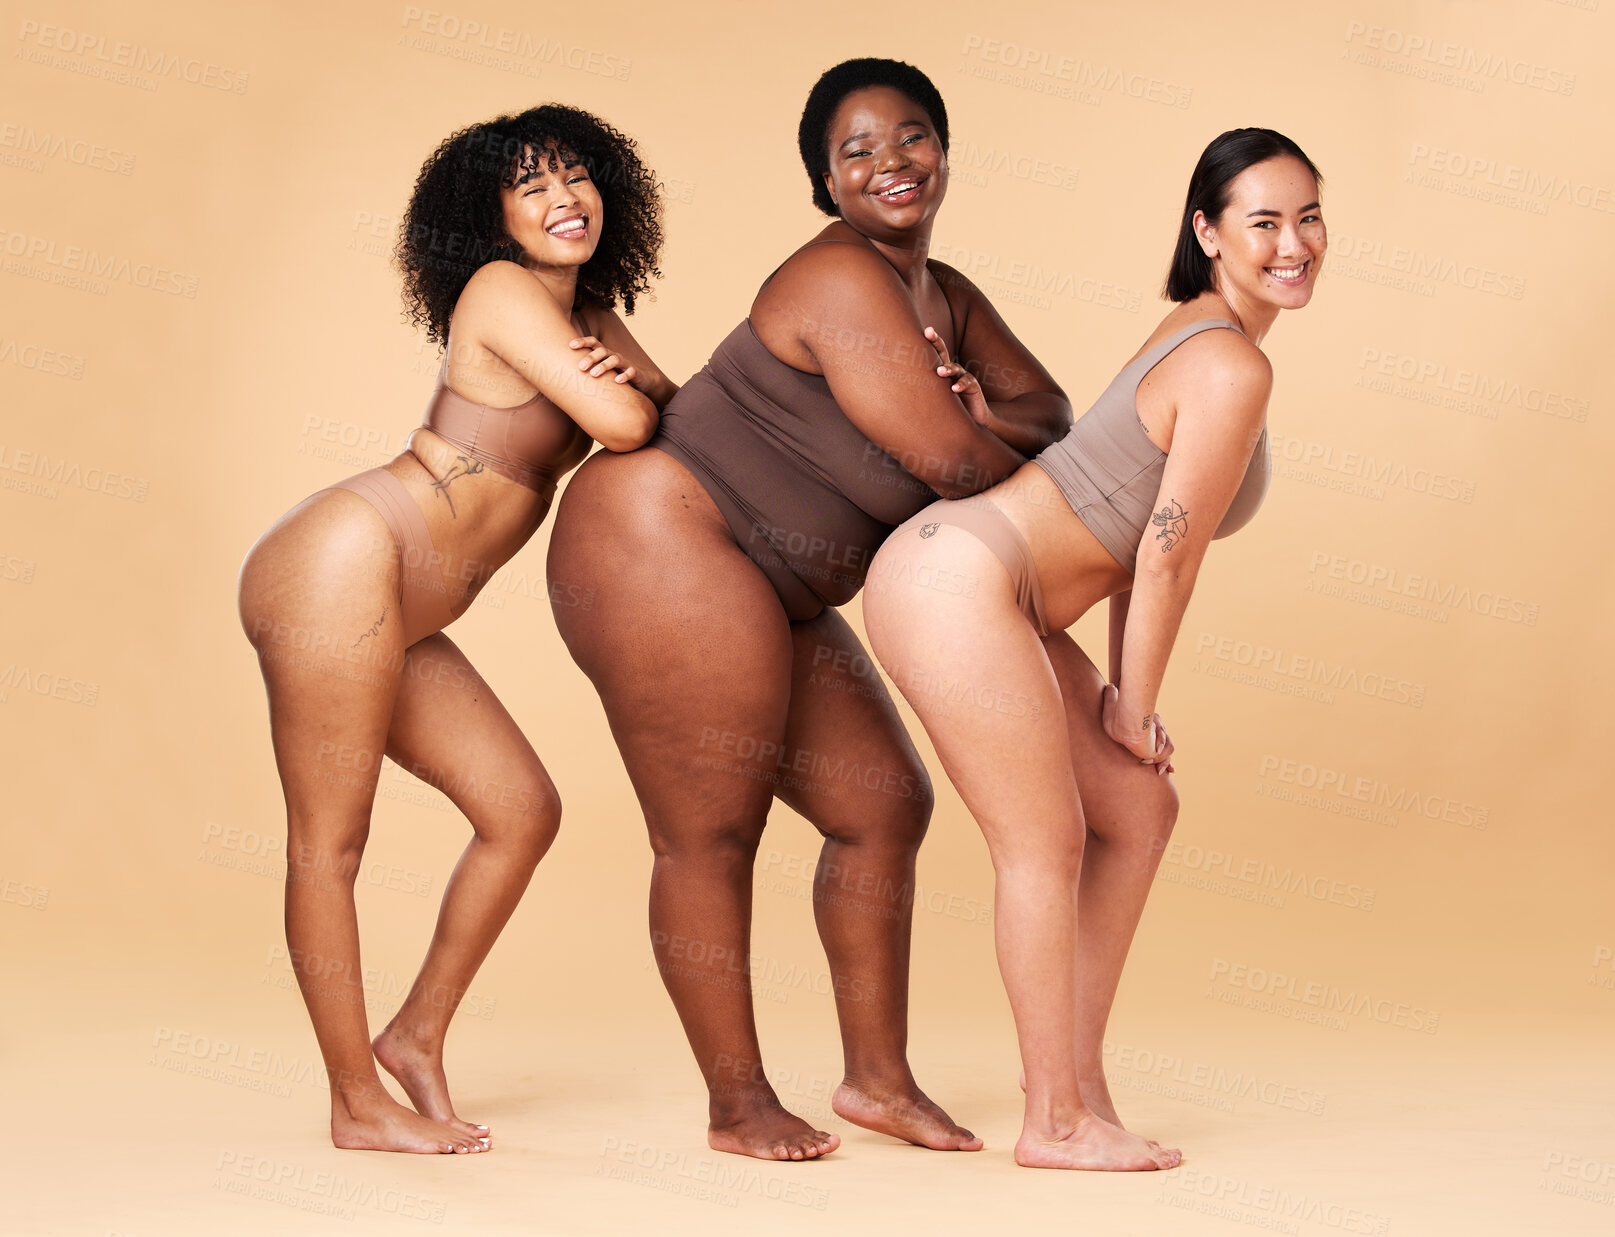 Buy stock photo Diversity women, body size and portrait of group together for inclusion, beauty and power. Underwear model friends happy on beige background with cellulite legs, skin pride and self love motivation